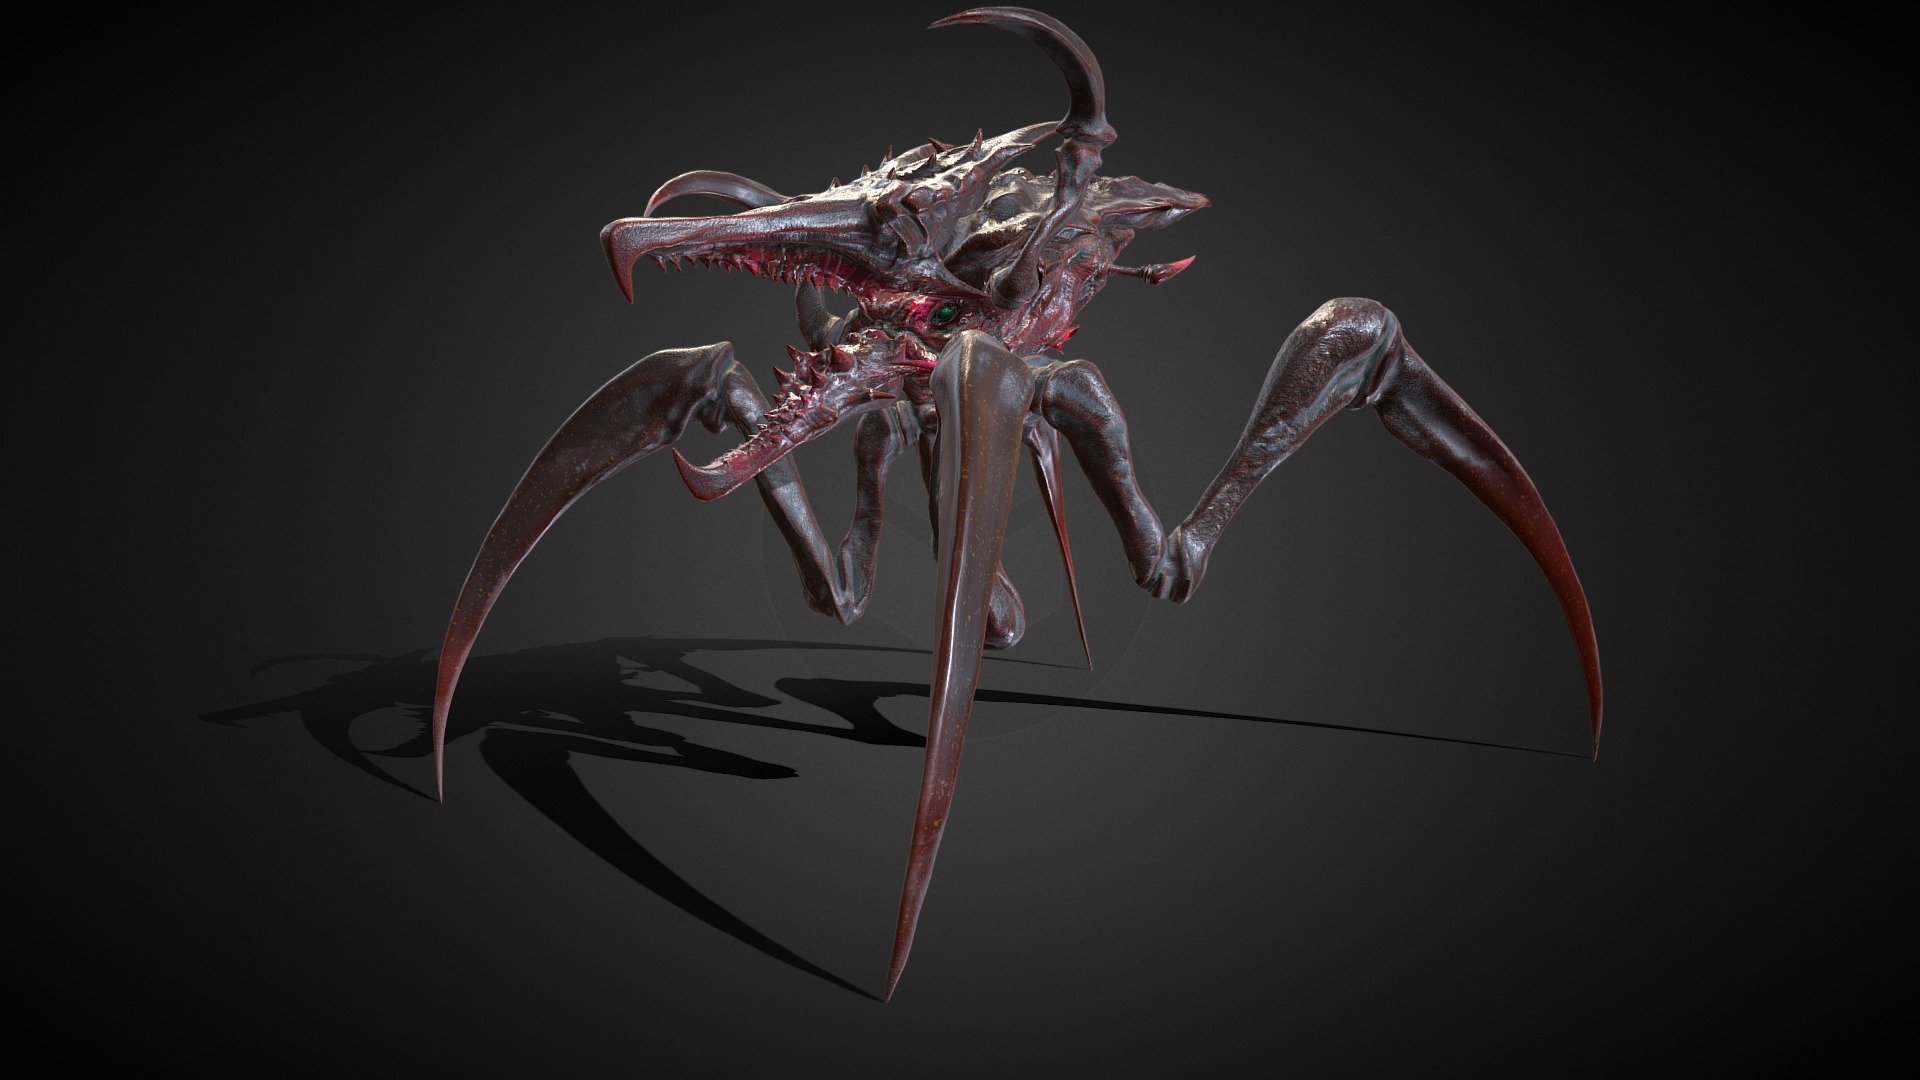 I have created a 3D model of the  Warrior Bug from the movie . This is my first time creating a PBR 3D model, and I hope everyone likes it!!! - Starship Troopers Warrior Bug 星河战队虫族 - 3D model by SunKe_孙珂 (@Robinsun212) 3d model